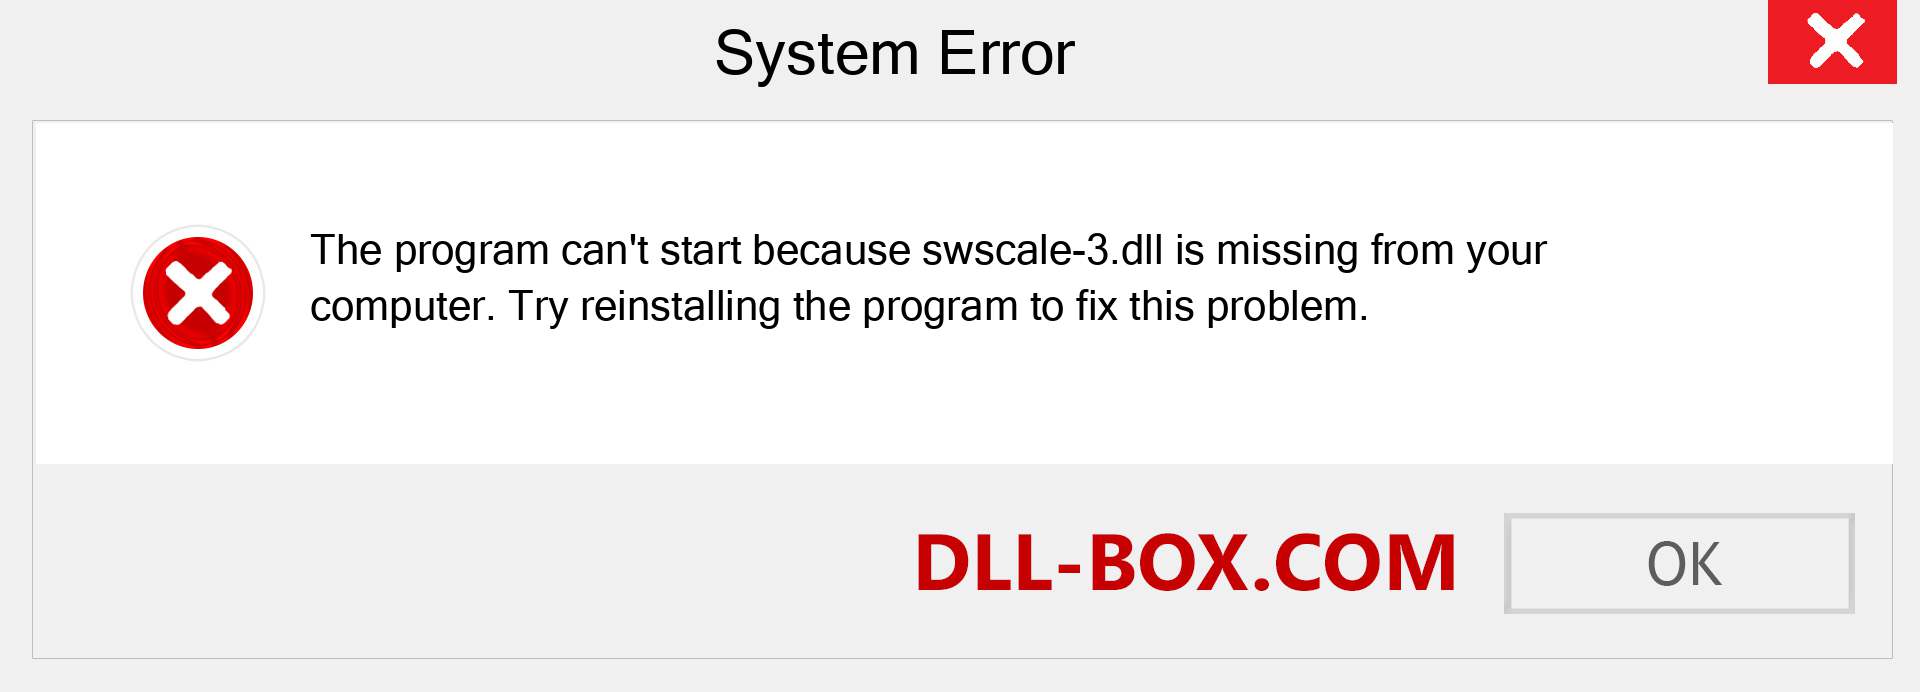  swscale-3.dll file is missing?. Download for Windows 7, 8, 10 - Fix  swscale-3 dll Missing Error on Windows, photos, images